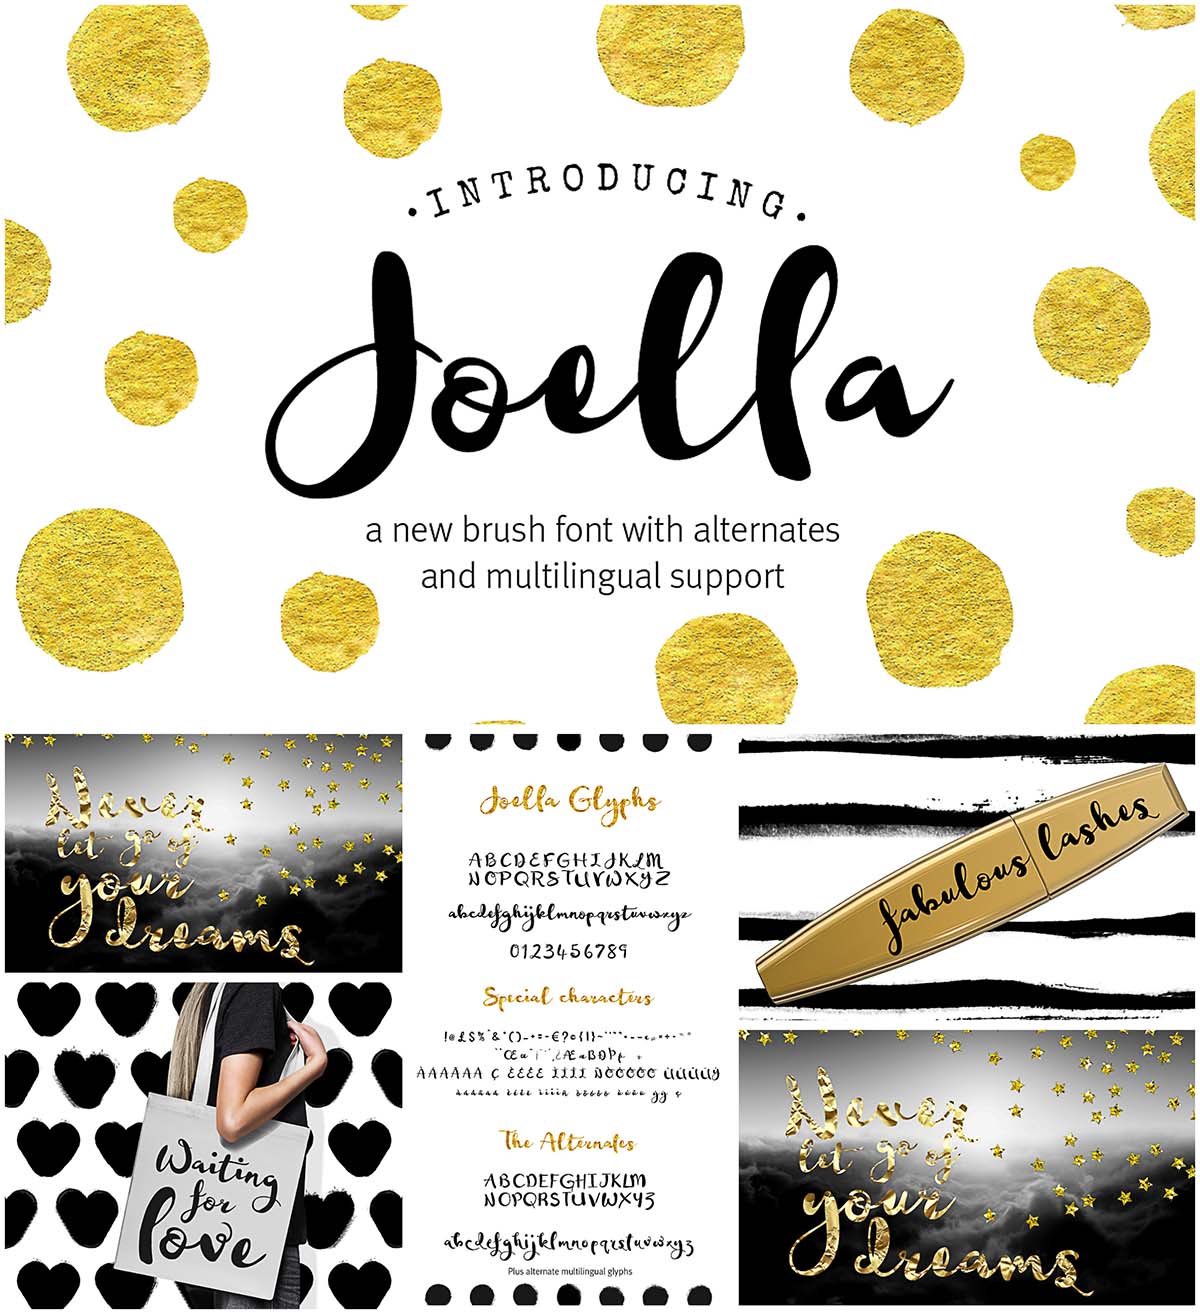 Joell calligraphy typeface